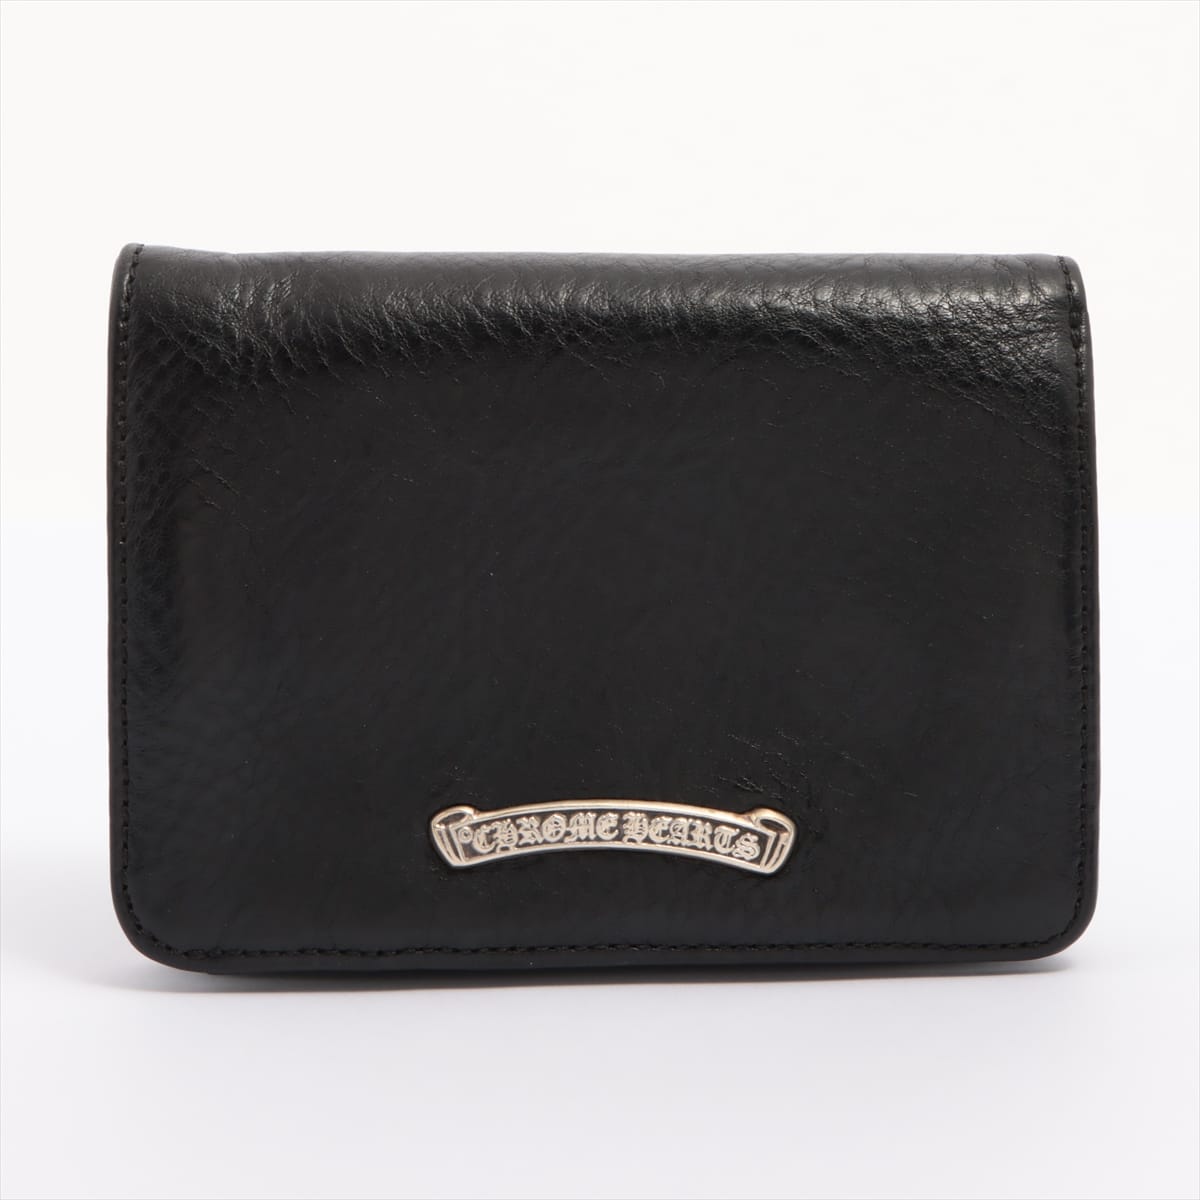 Chrome Hearts Joey Wallet Leather With invoice